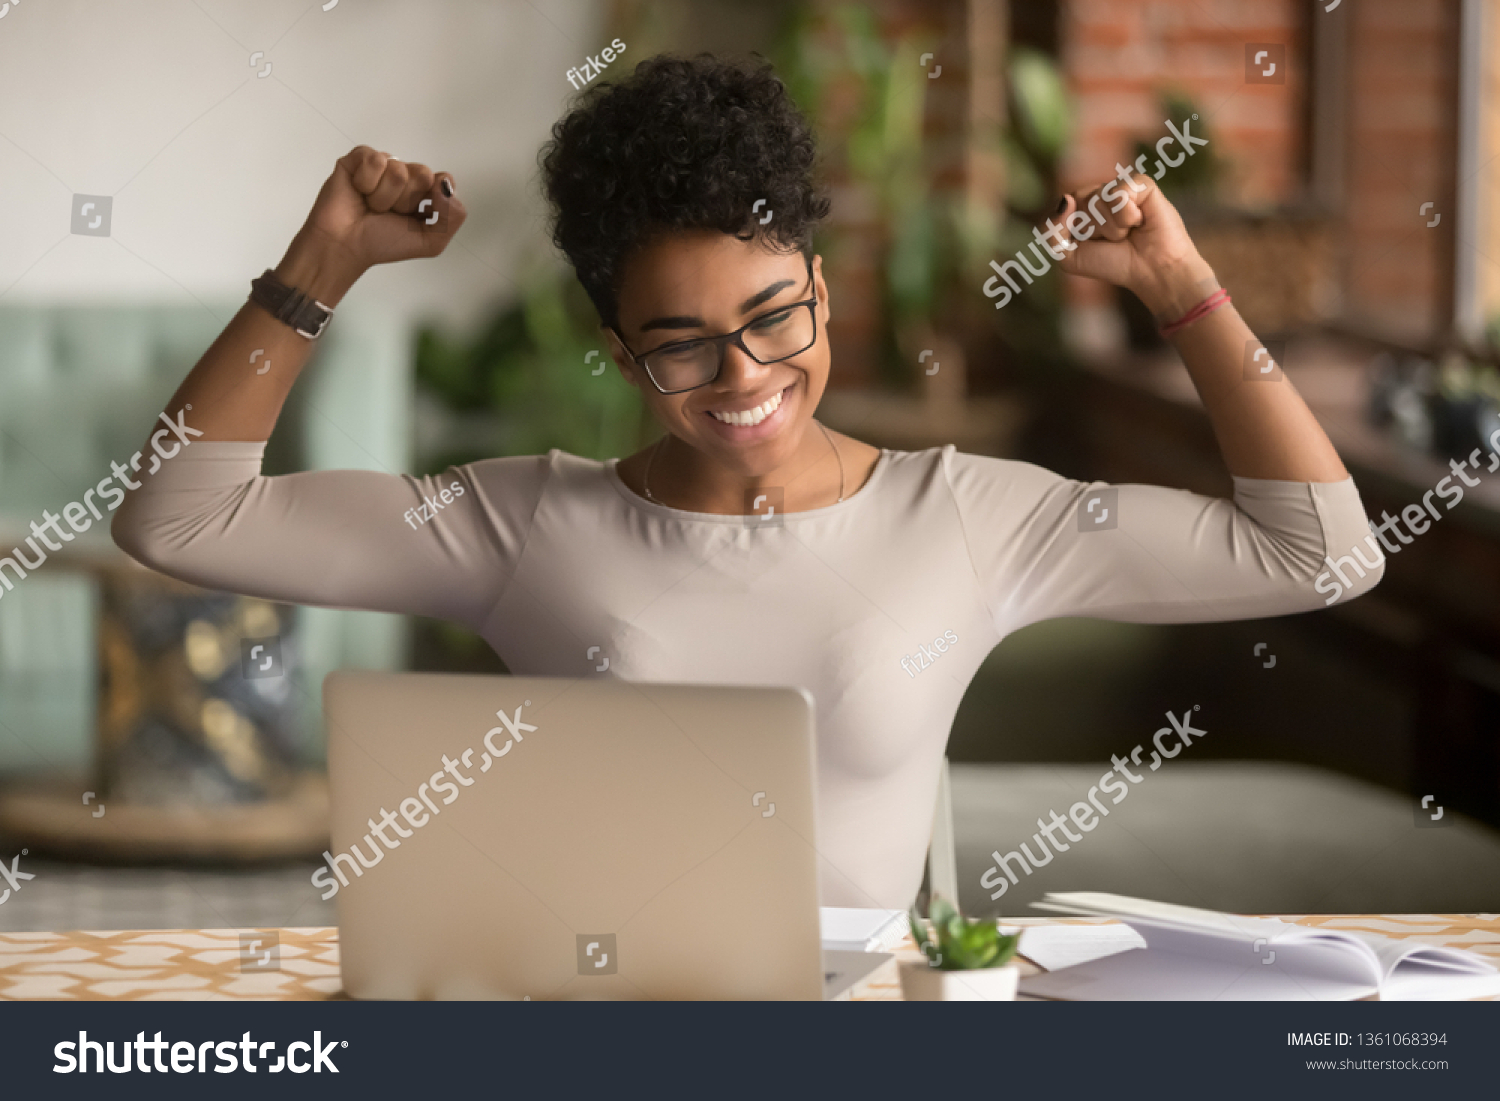 Excited happy african american woman feeling winner rejoicing online win got new job opportunity, overjoyed motivated mixed race girl student receive good test results on laptop celebrating admission #1361068394